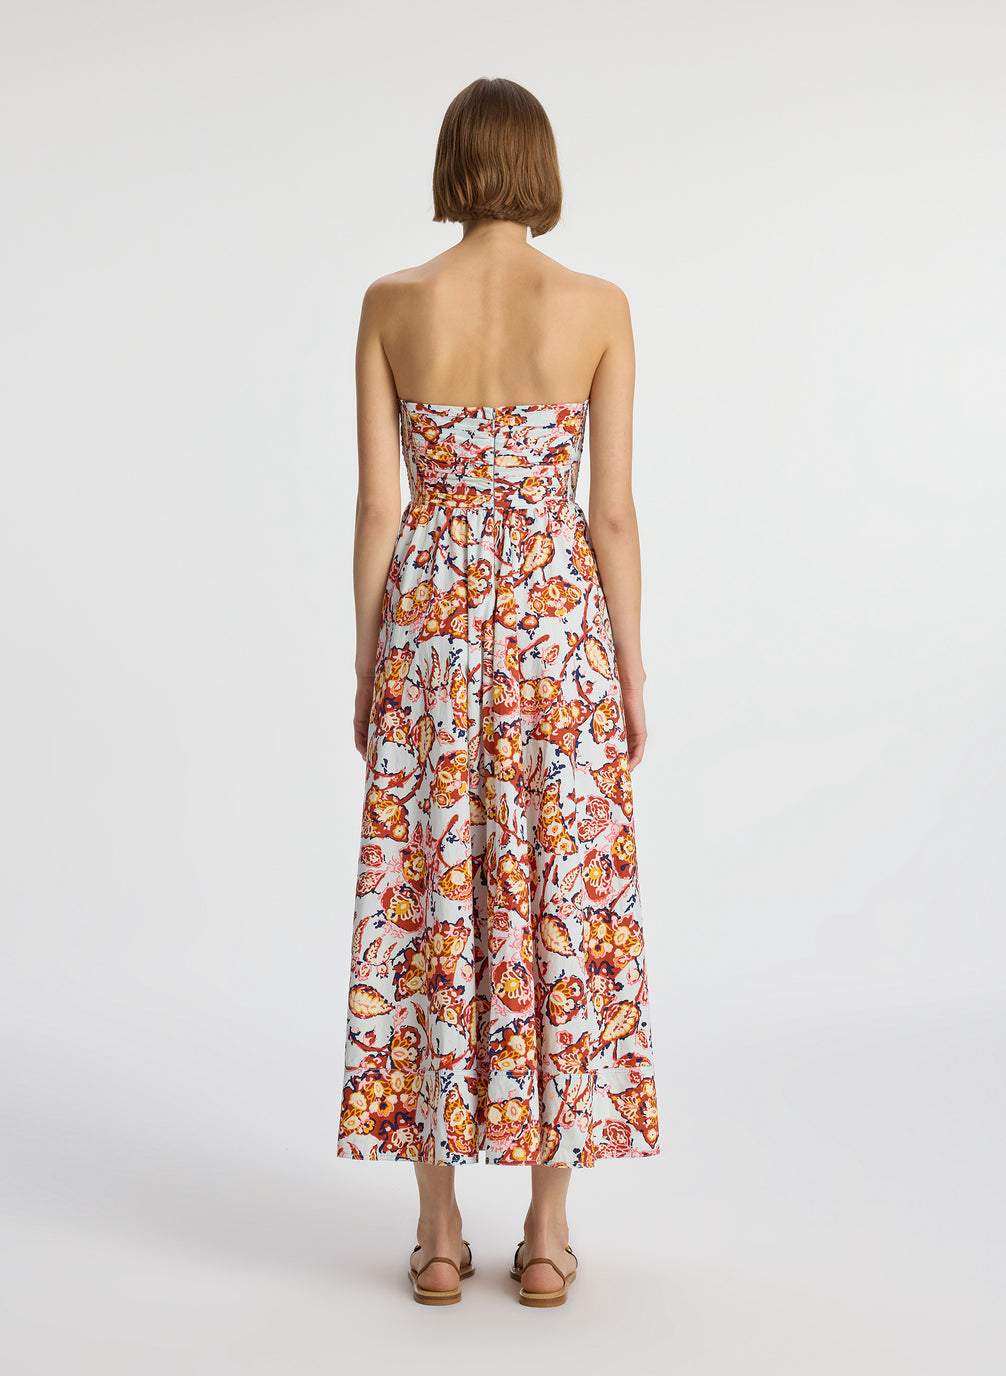 back view of woman wearing multicolor printed strapless midi dress